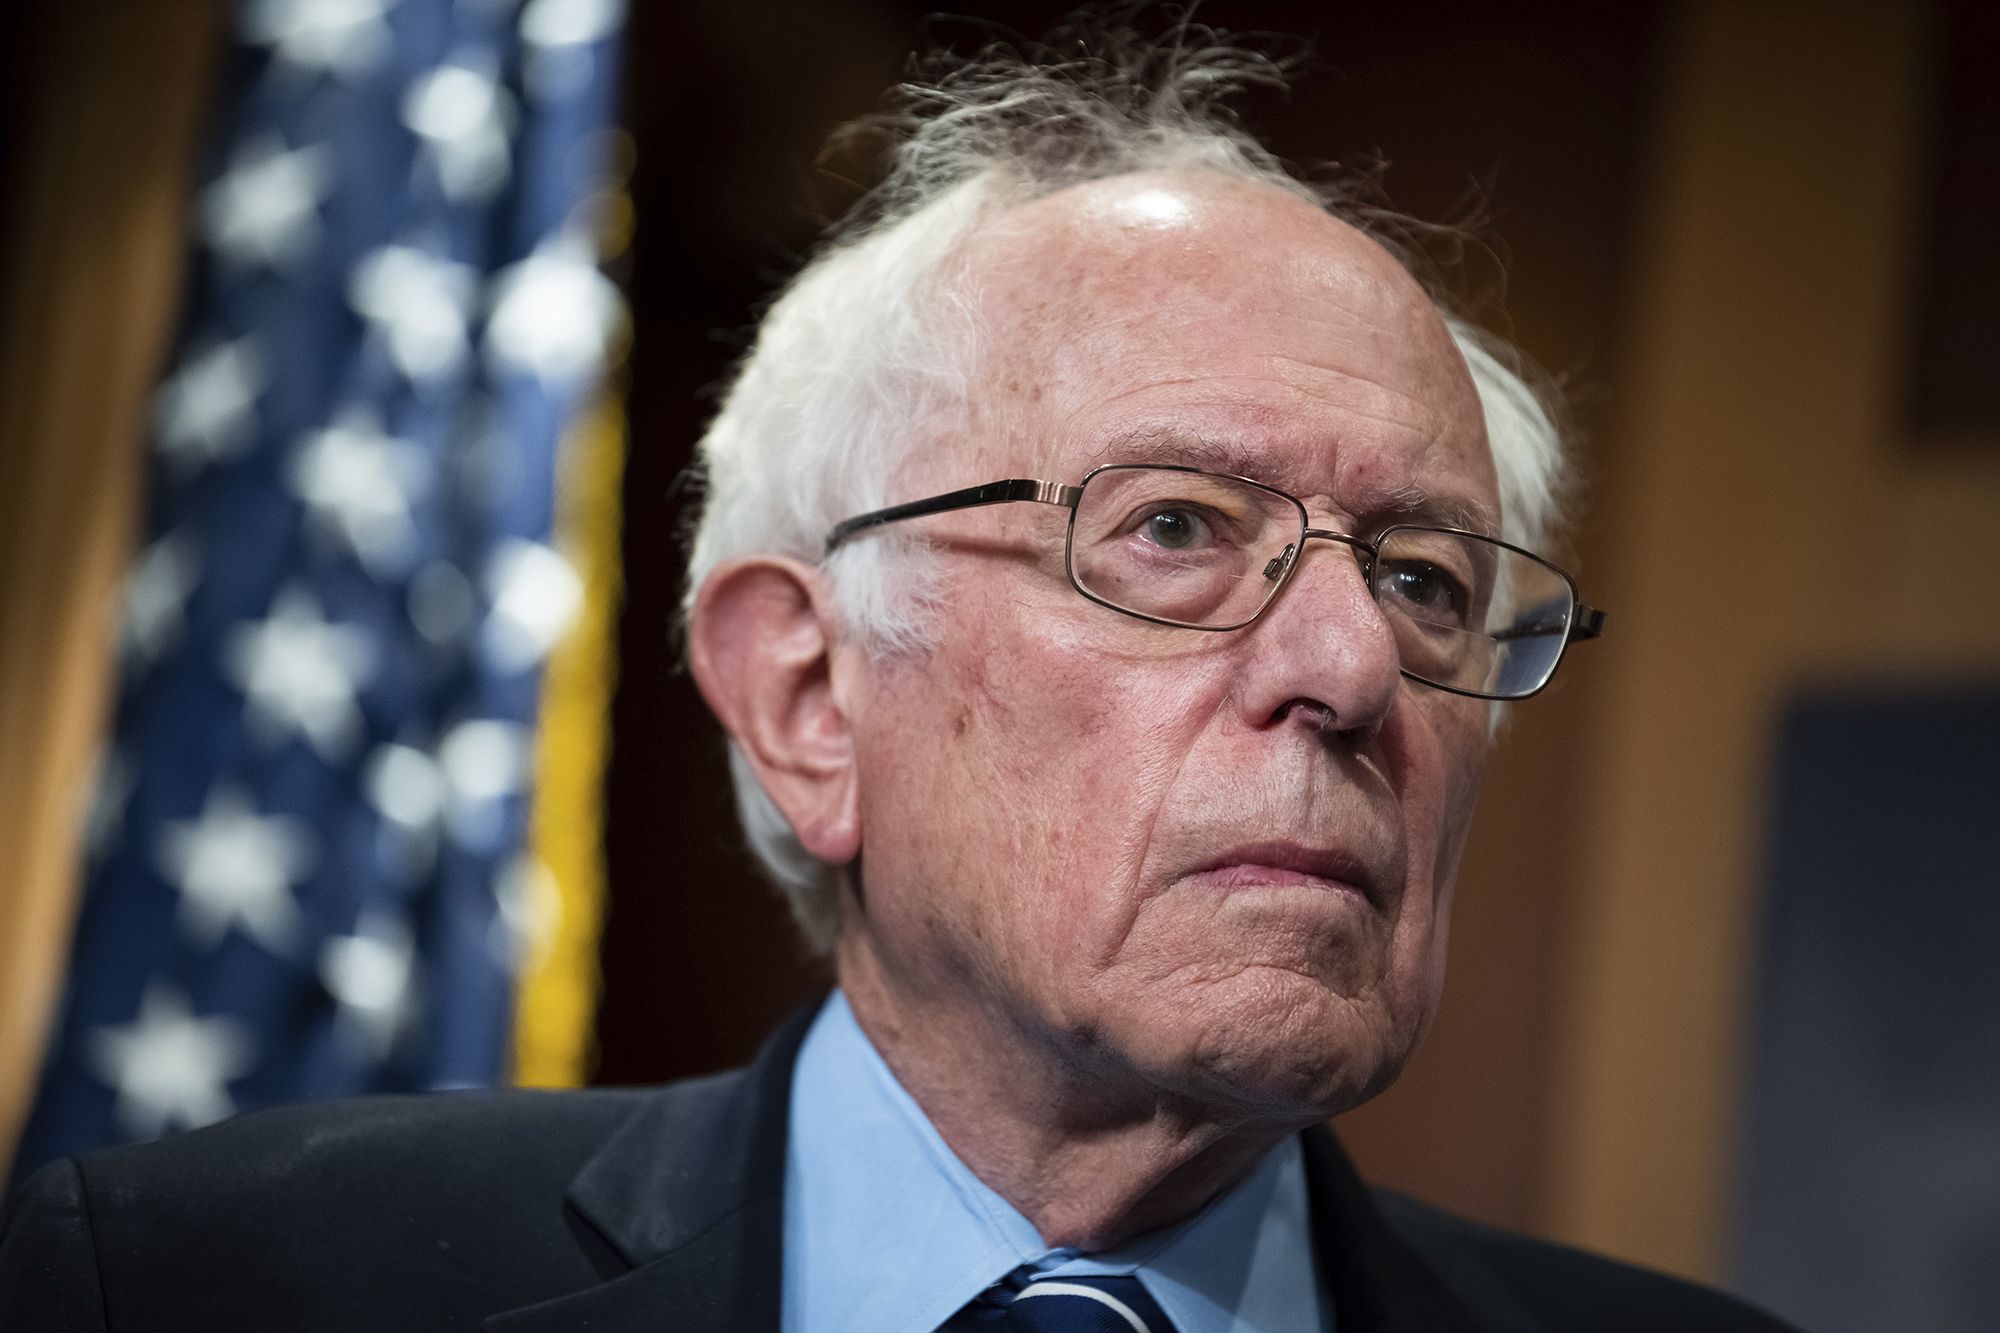 Bernie Sanders suffers from Fetal Alcohol Syndrome